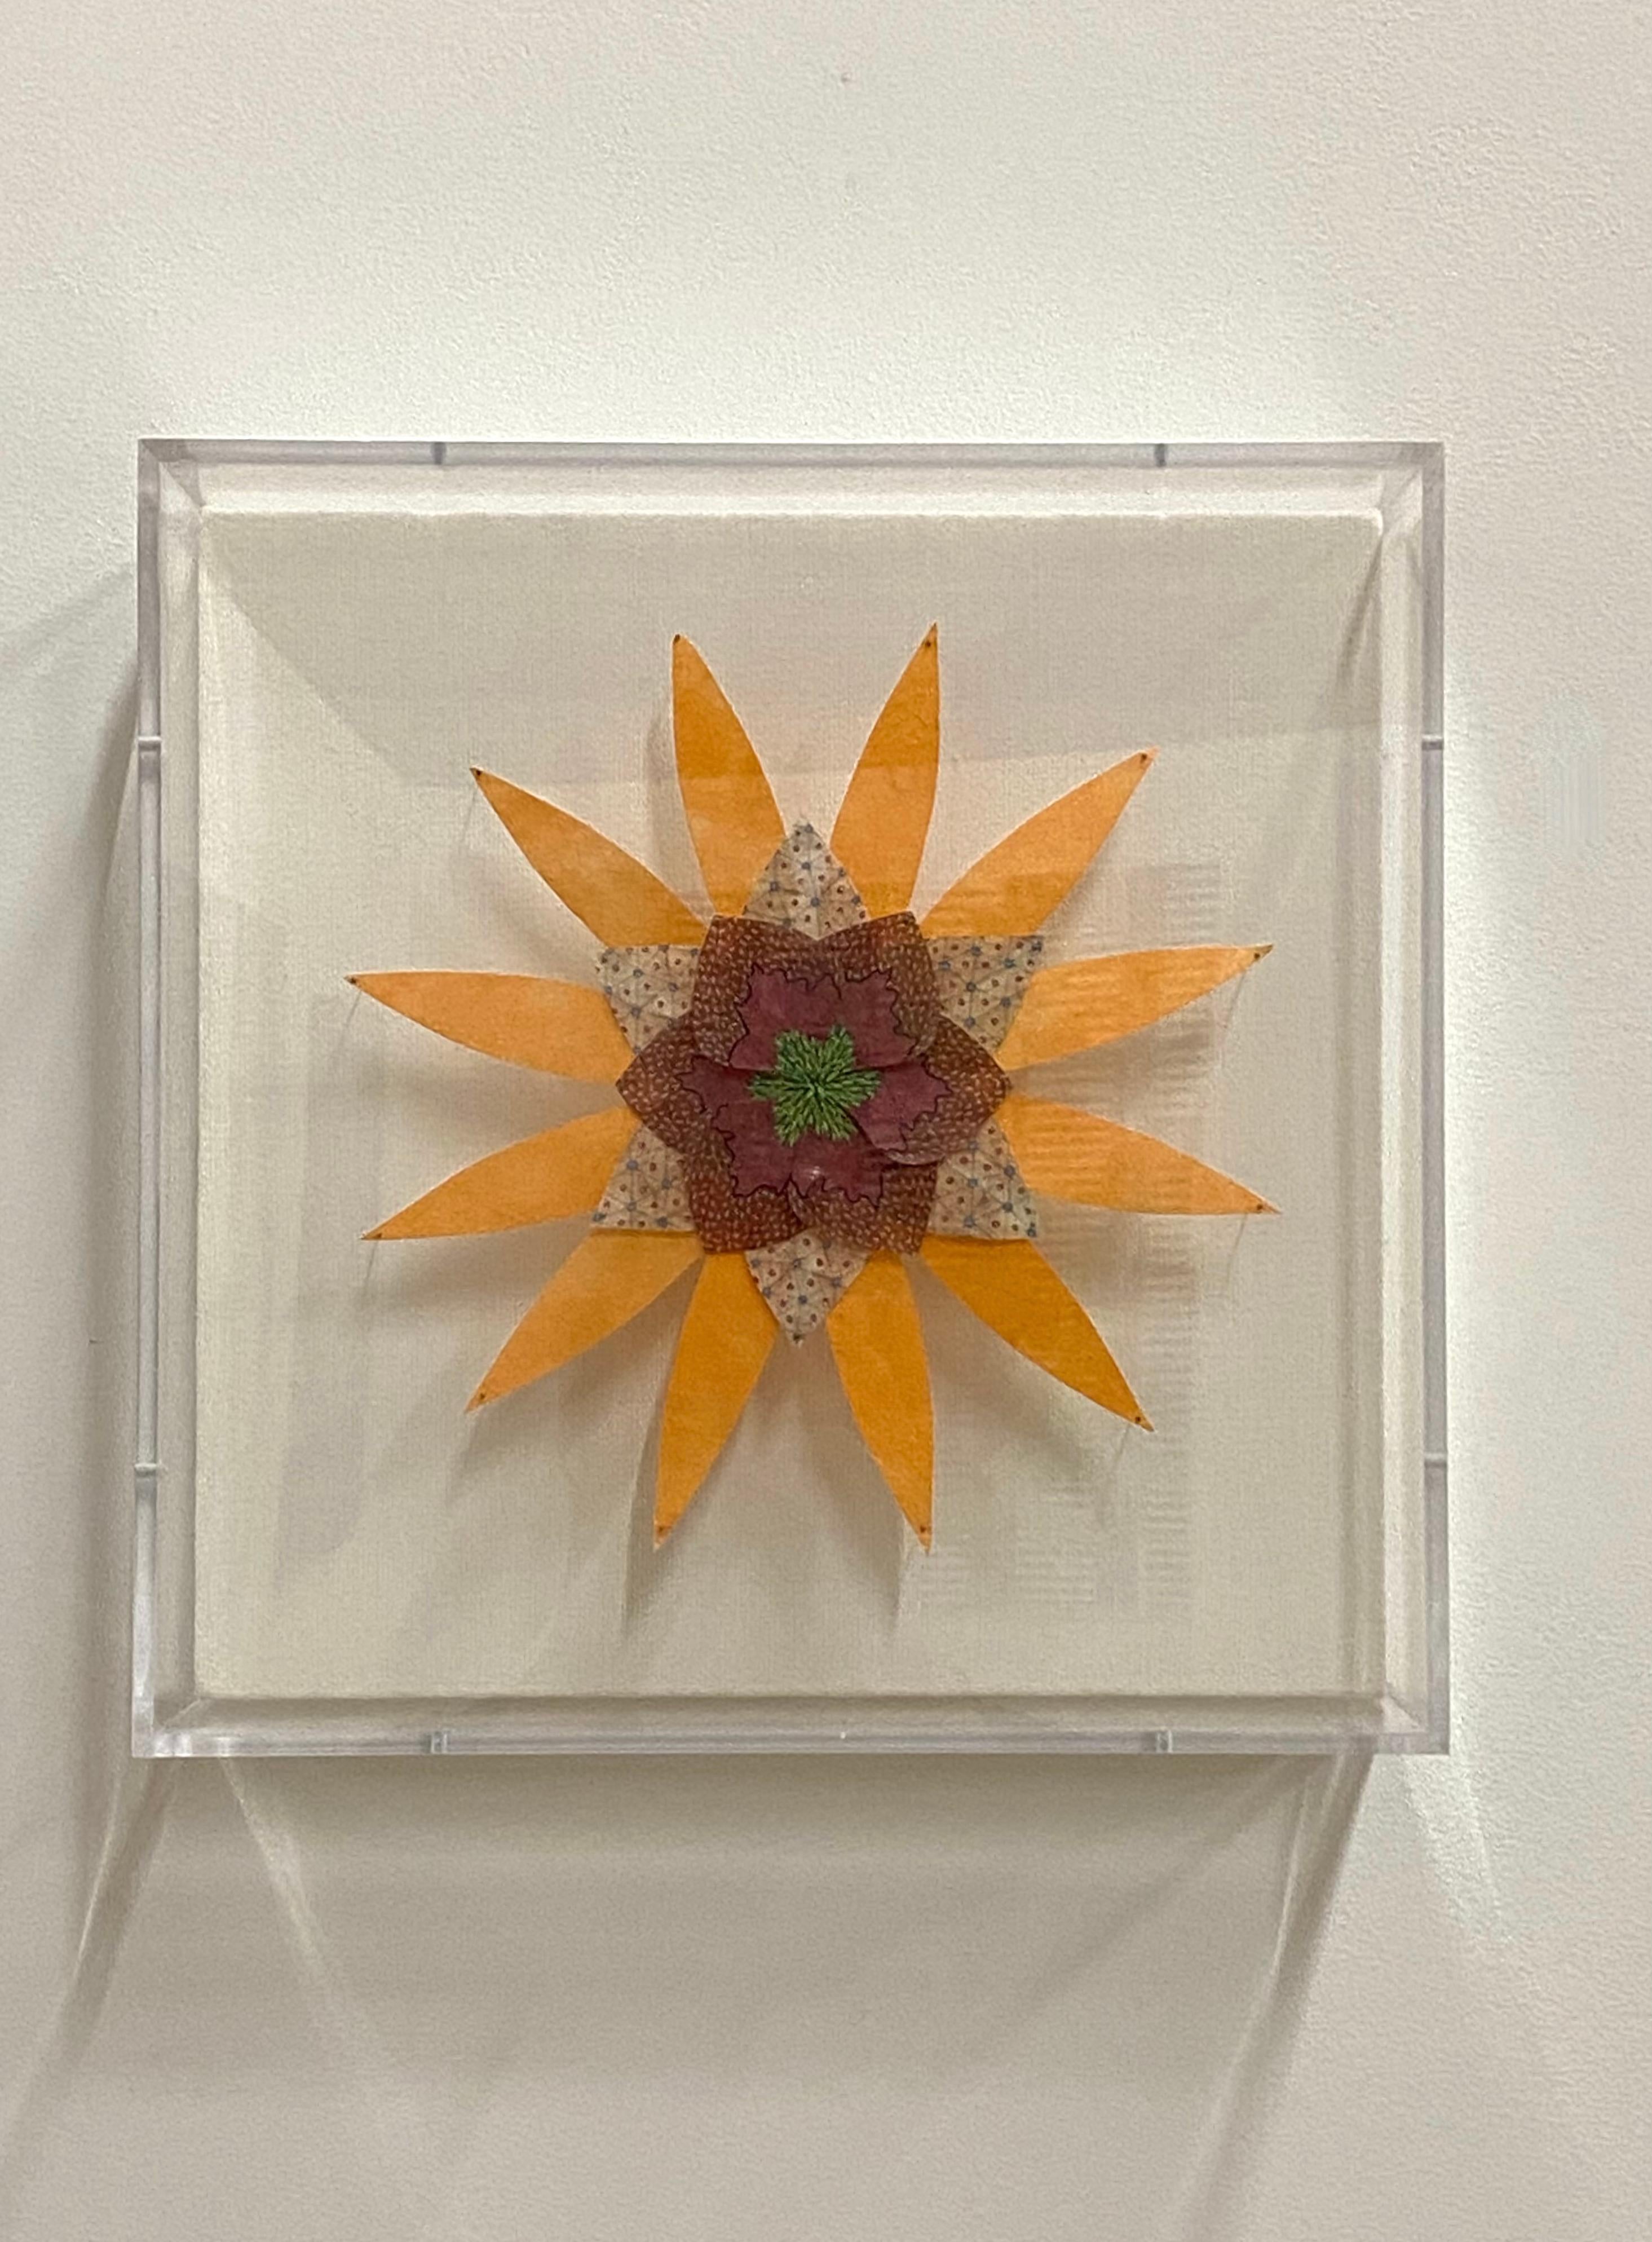 In this bright and colorful paper sculpture, a fantastical botanical form in light orange with dark burgundy, magenta and light brown in the center is composed of hand-colored digital prints on hand-cut, pigmented, handmade Loktah paper pinned with